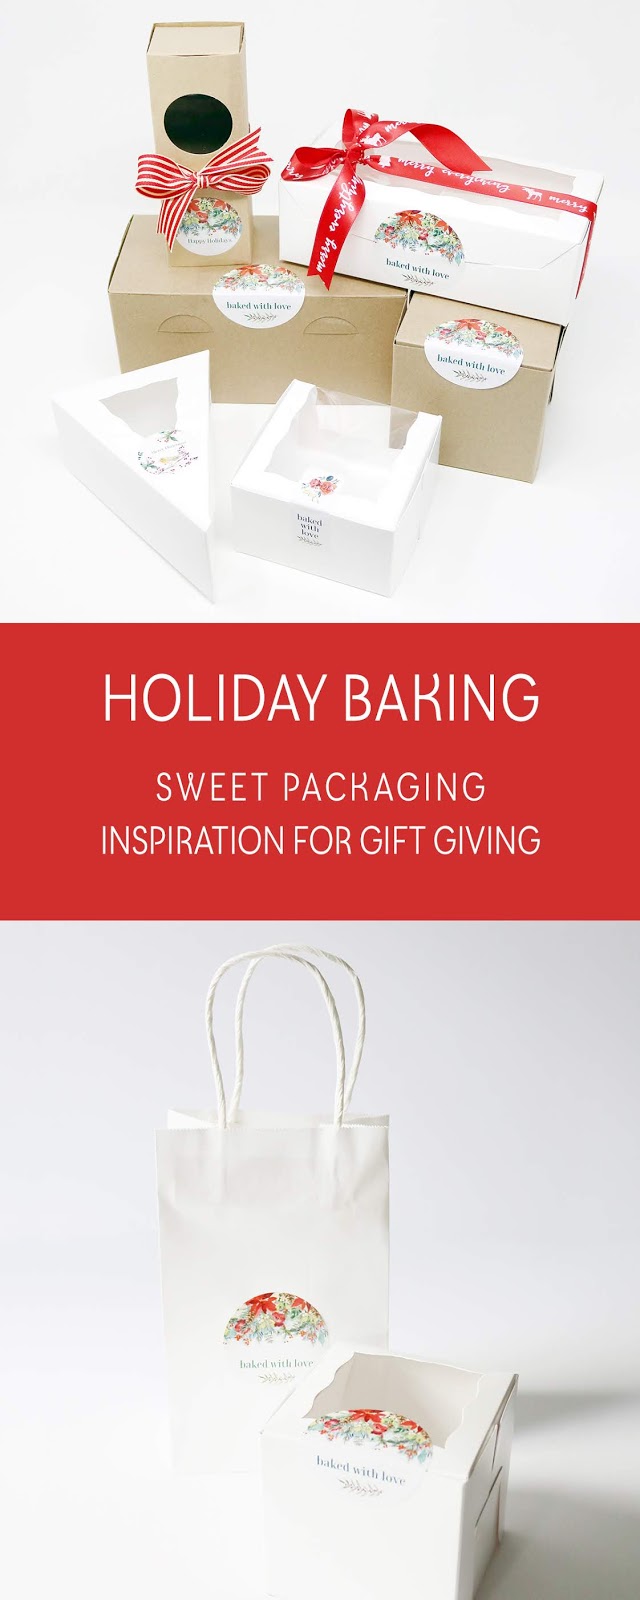 Holiday Baking - Sweet Packaging Inspiration for Gift Giving | creativebag.com